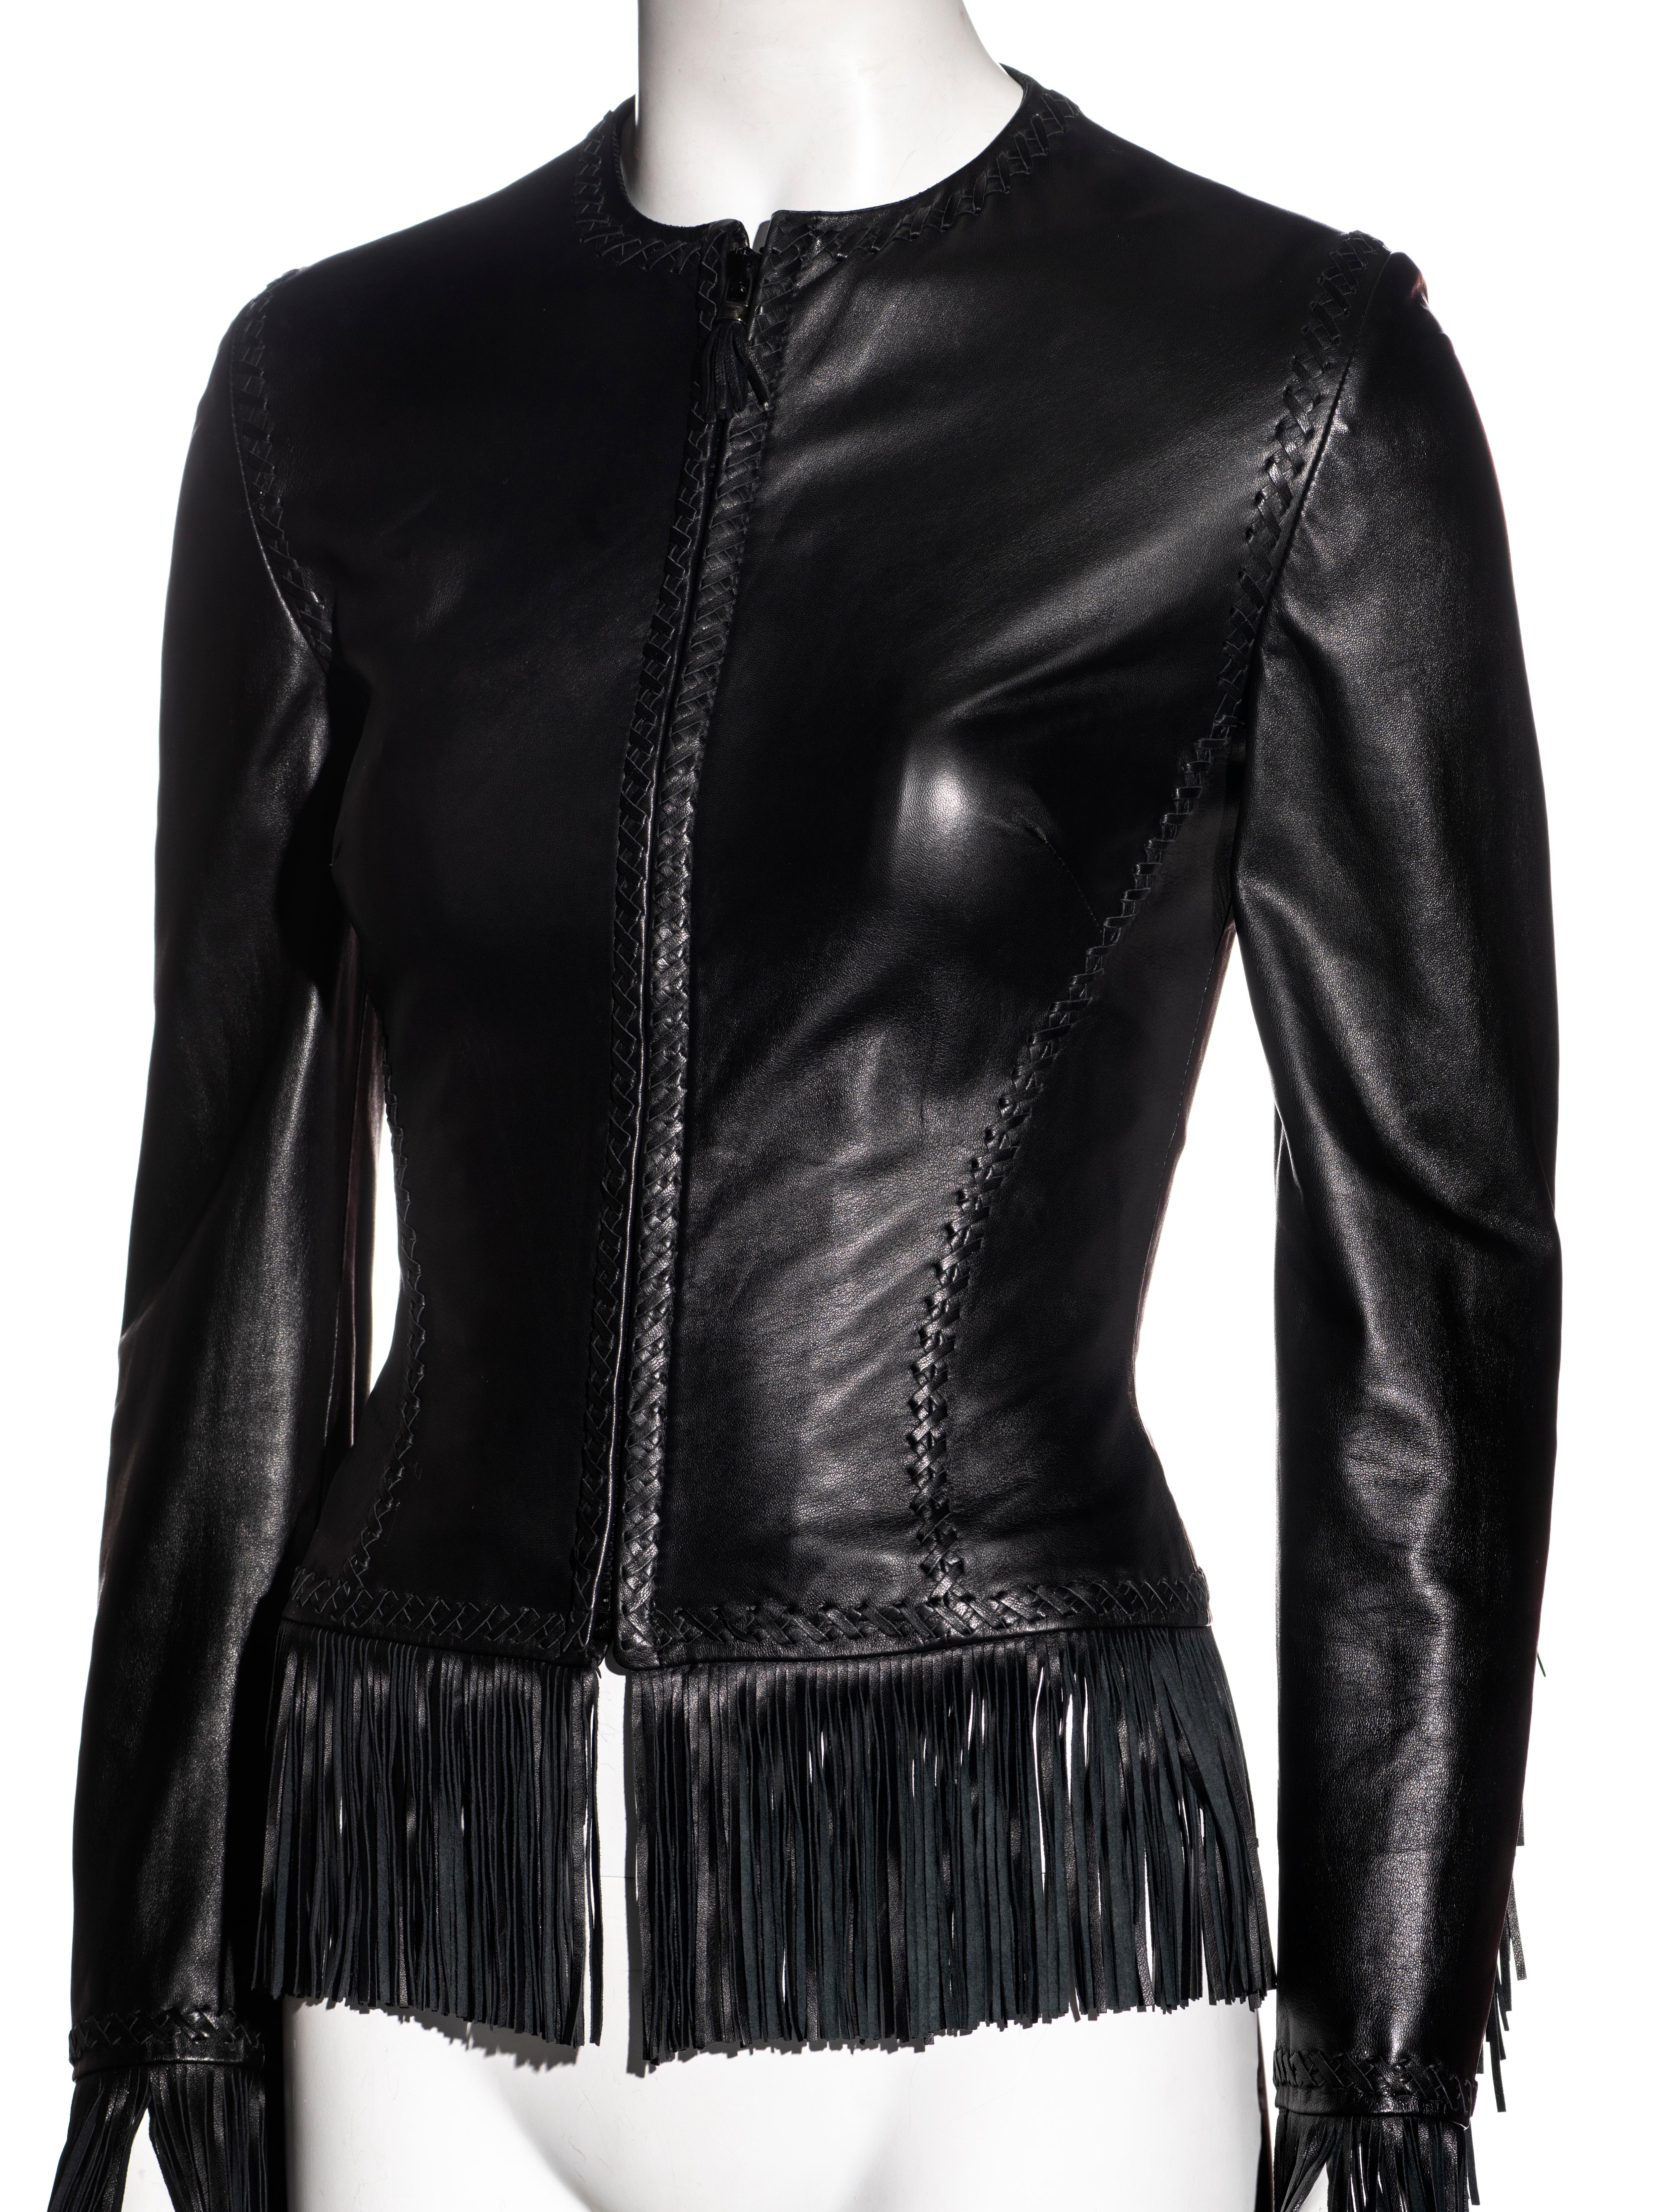 Women's Gianni Versace black leather open-back jacket, ss 2002 For Sale